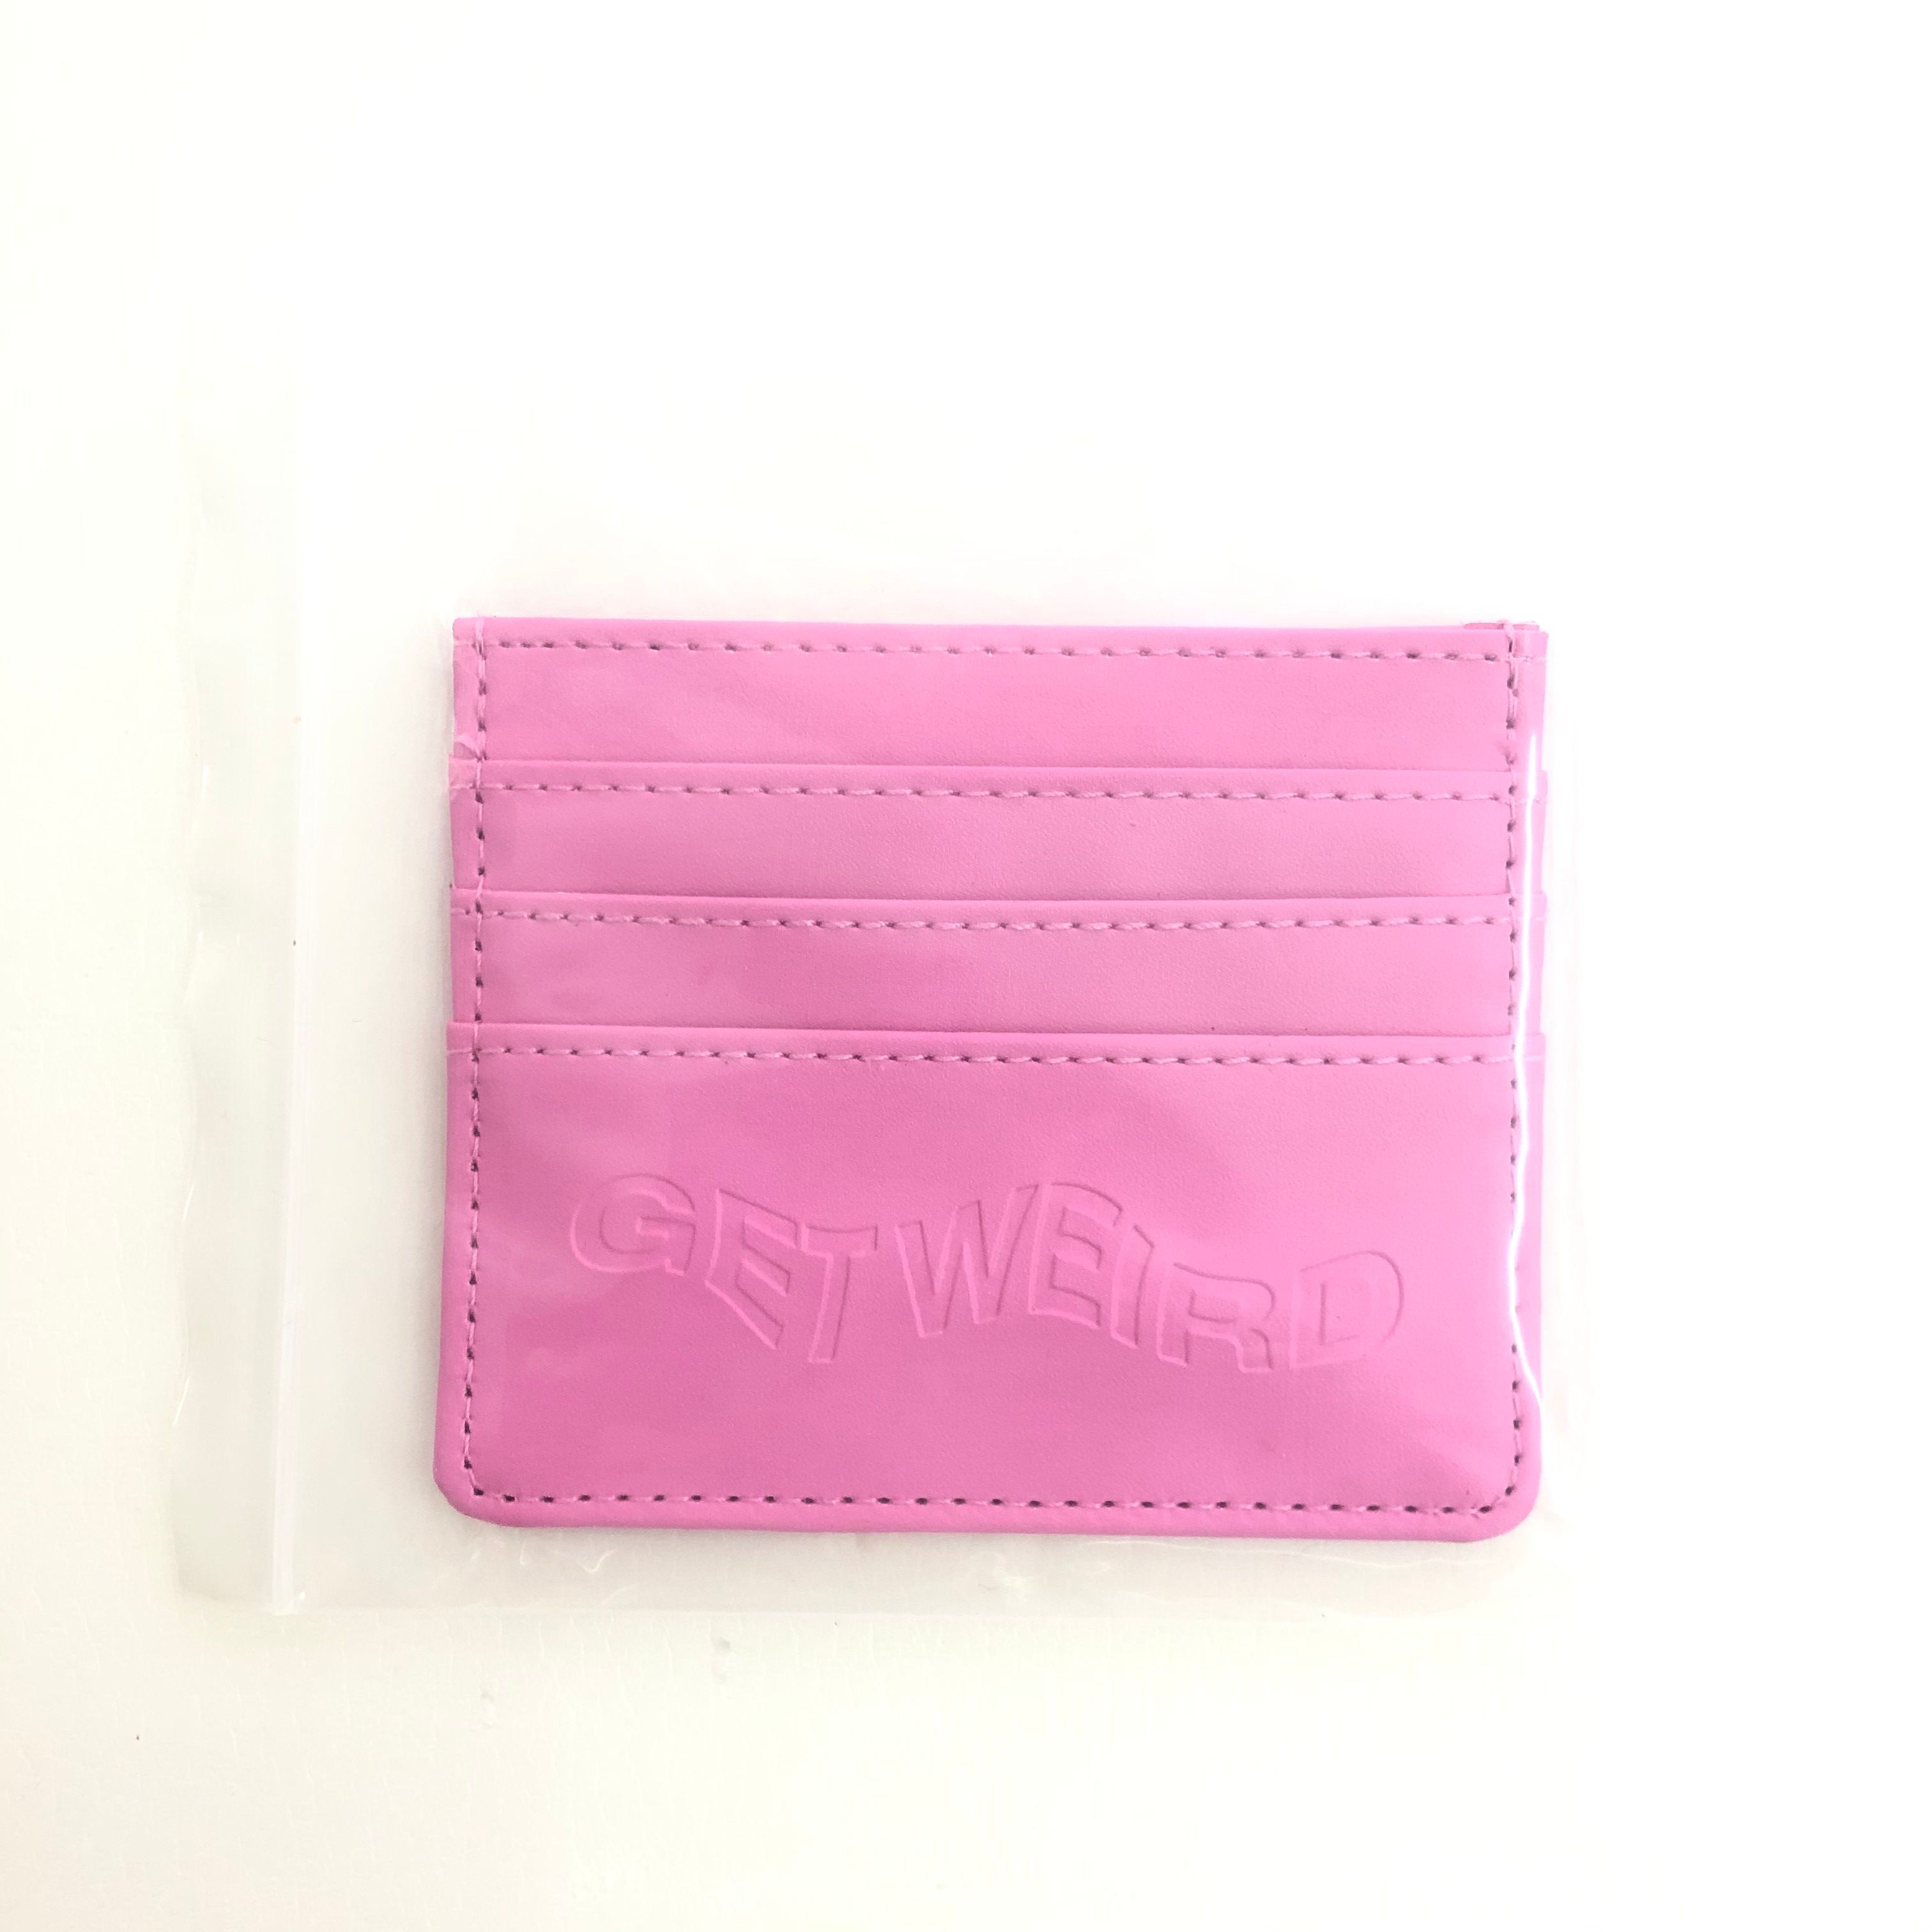 Pre-owned Anti Social Social Club Ds Assc Pink Rich Cardholder Wallet Supreme Cpfm Bape Kith